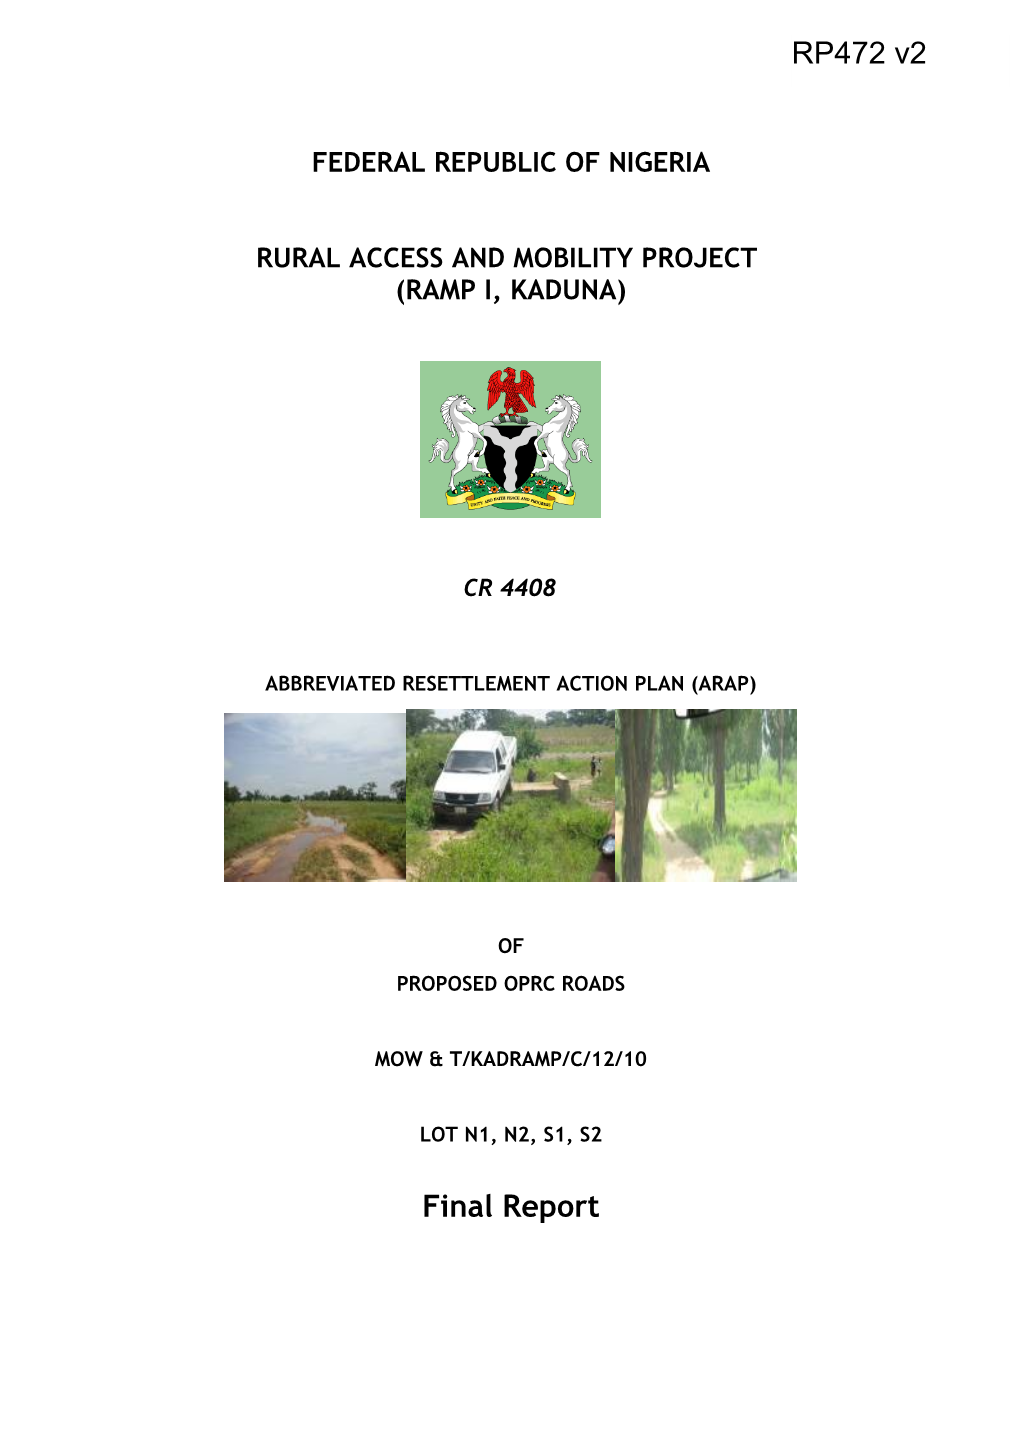 Rural Access and Mobility Project